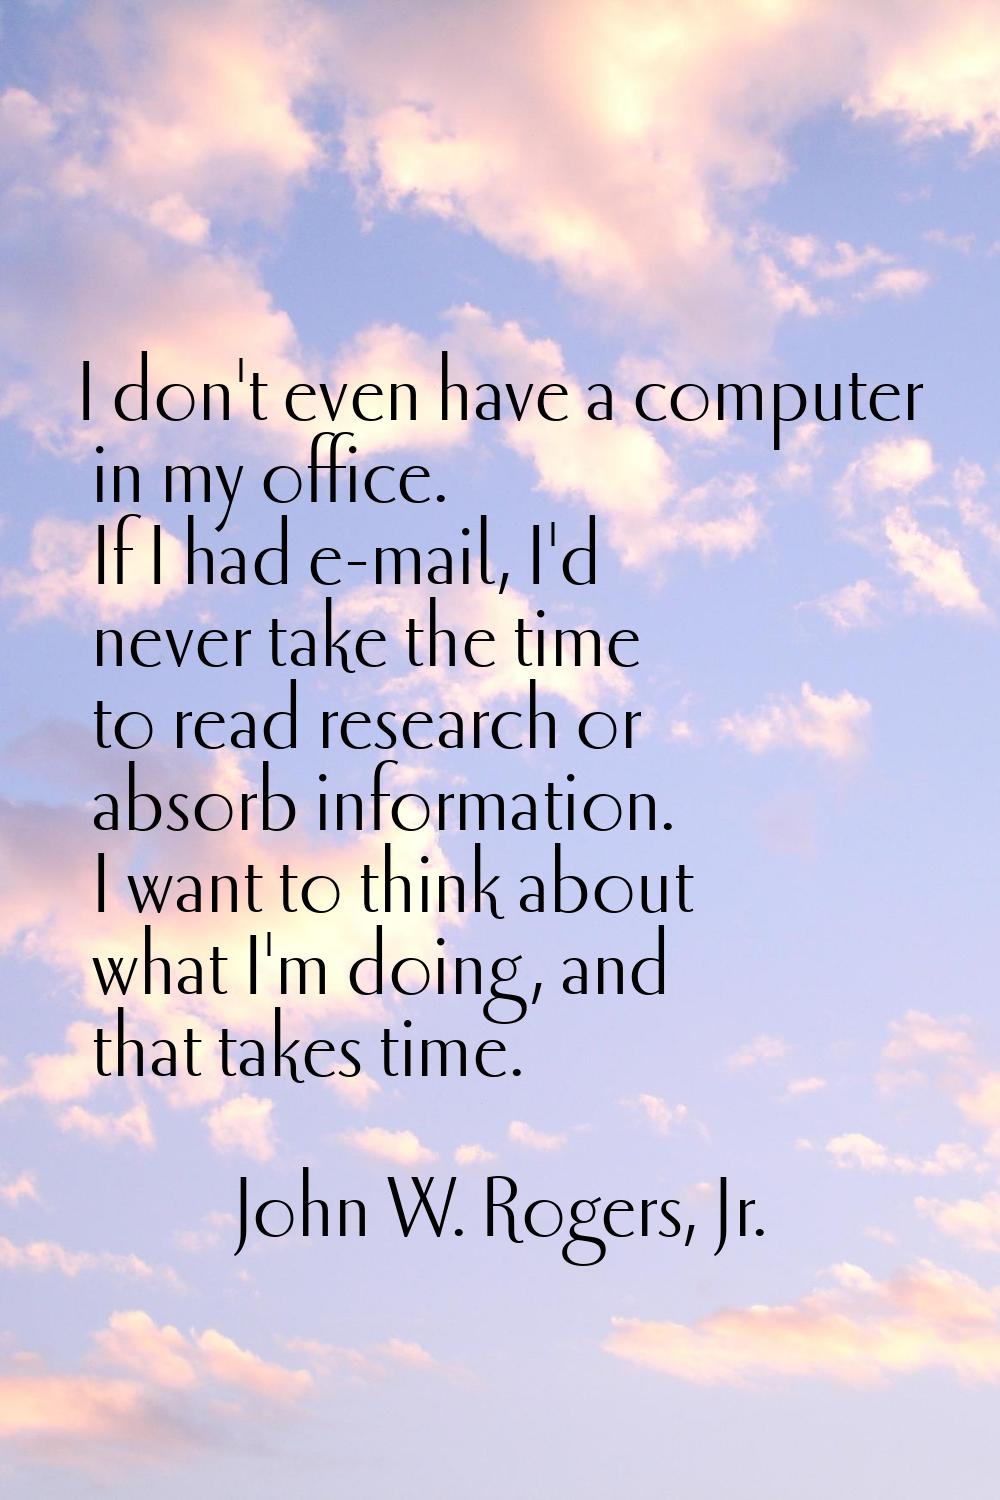 I don't even have a computer in my office. If I had e-mail, I'd never take the time to read researc